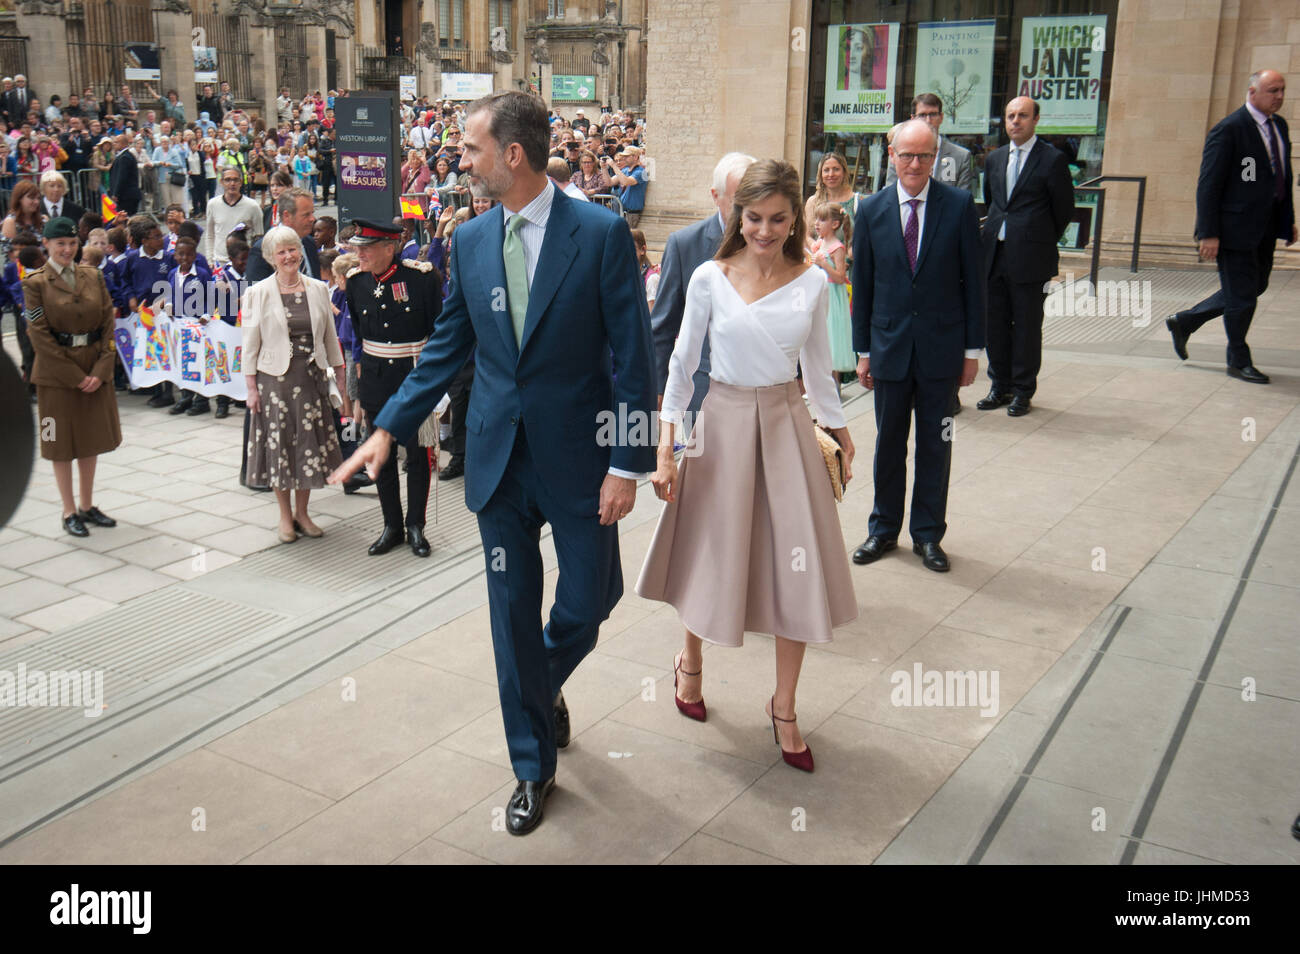 Oxford UK. 14th July 2017. The king and queen of Spain visit the Weston Library. They were greeted by the Lord Lieutenant and children from Tyndale community school in Oxford. Andrew Walmsley/Alamy Live News Stock Photo